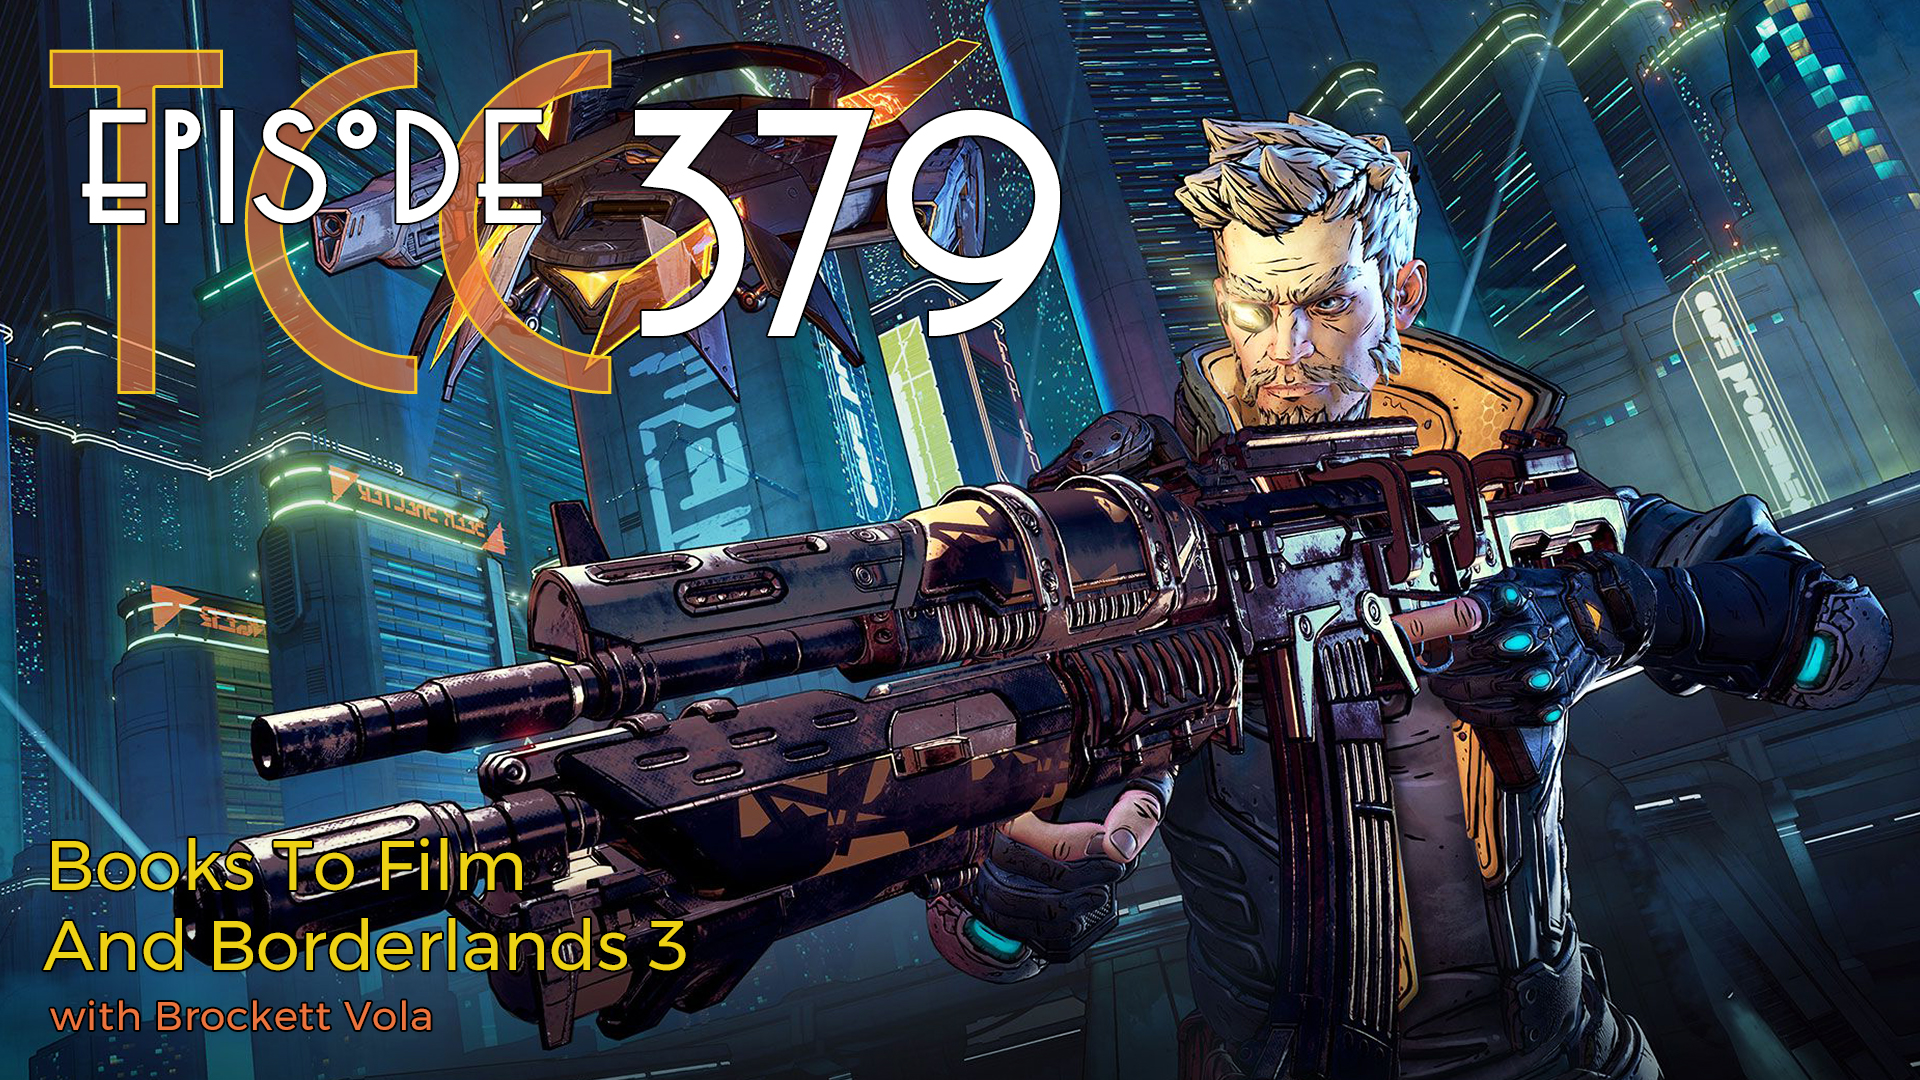 The Citadel Cafe 379: Books To Film And Borderlands 3